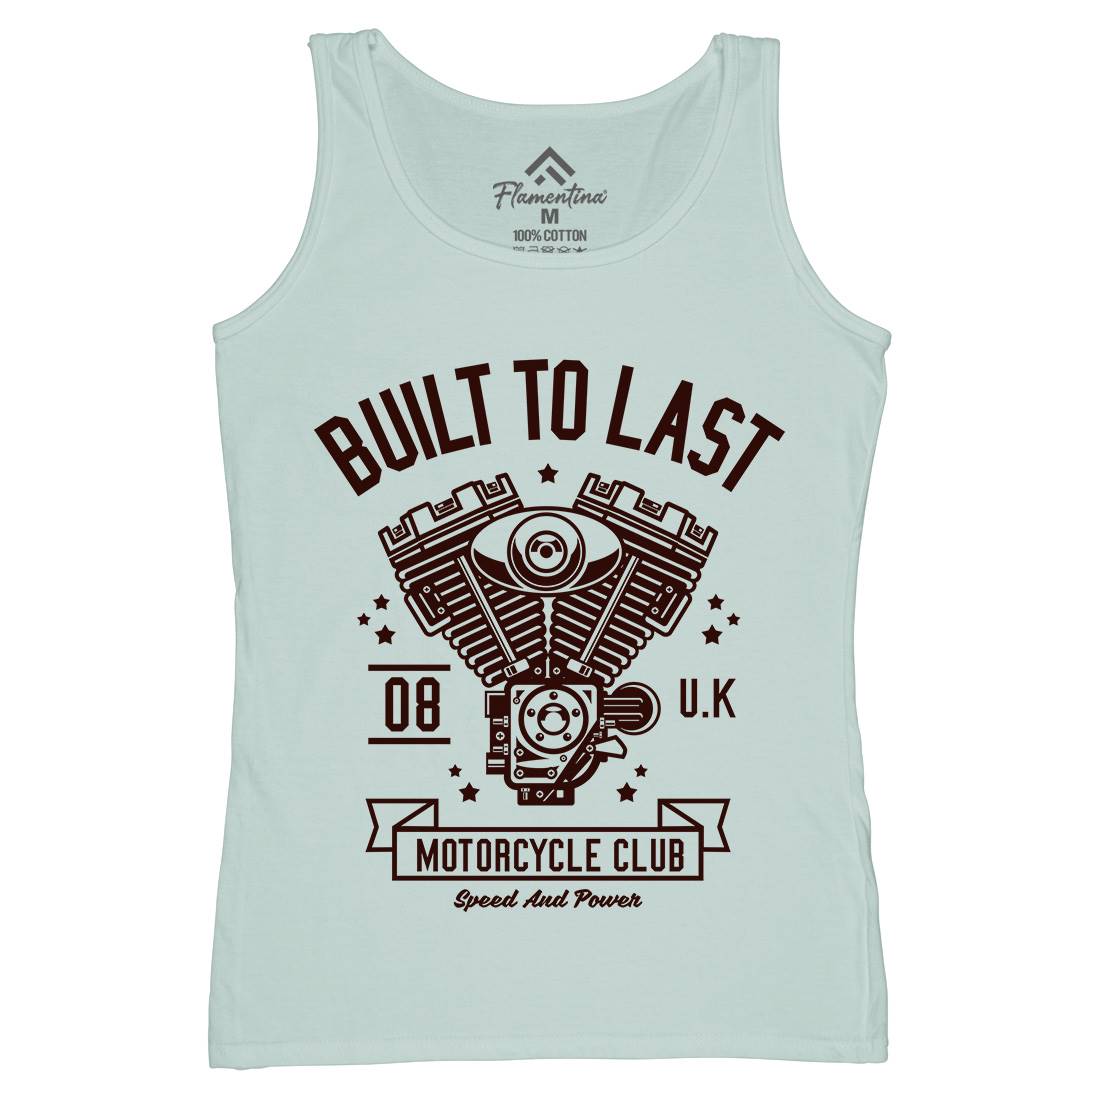 Built To Last Womens Organic Tank Top Vest Motorcycles A215